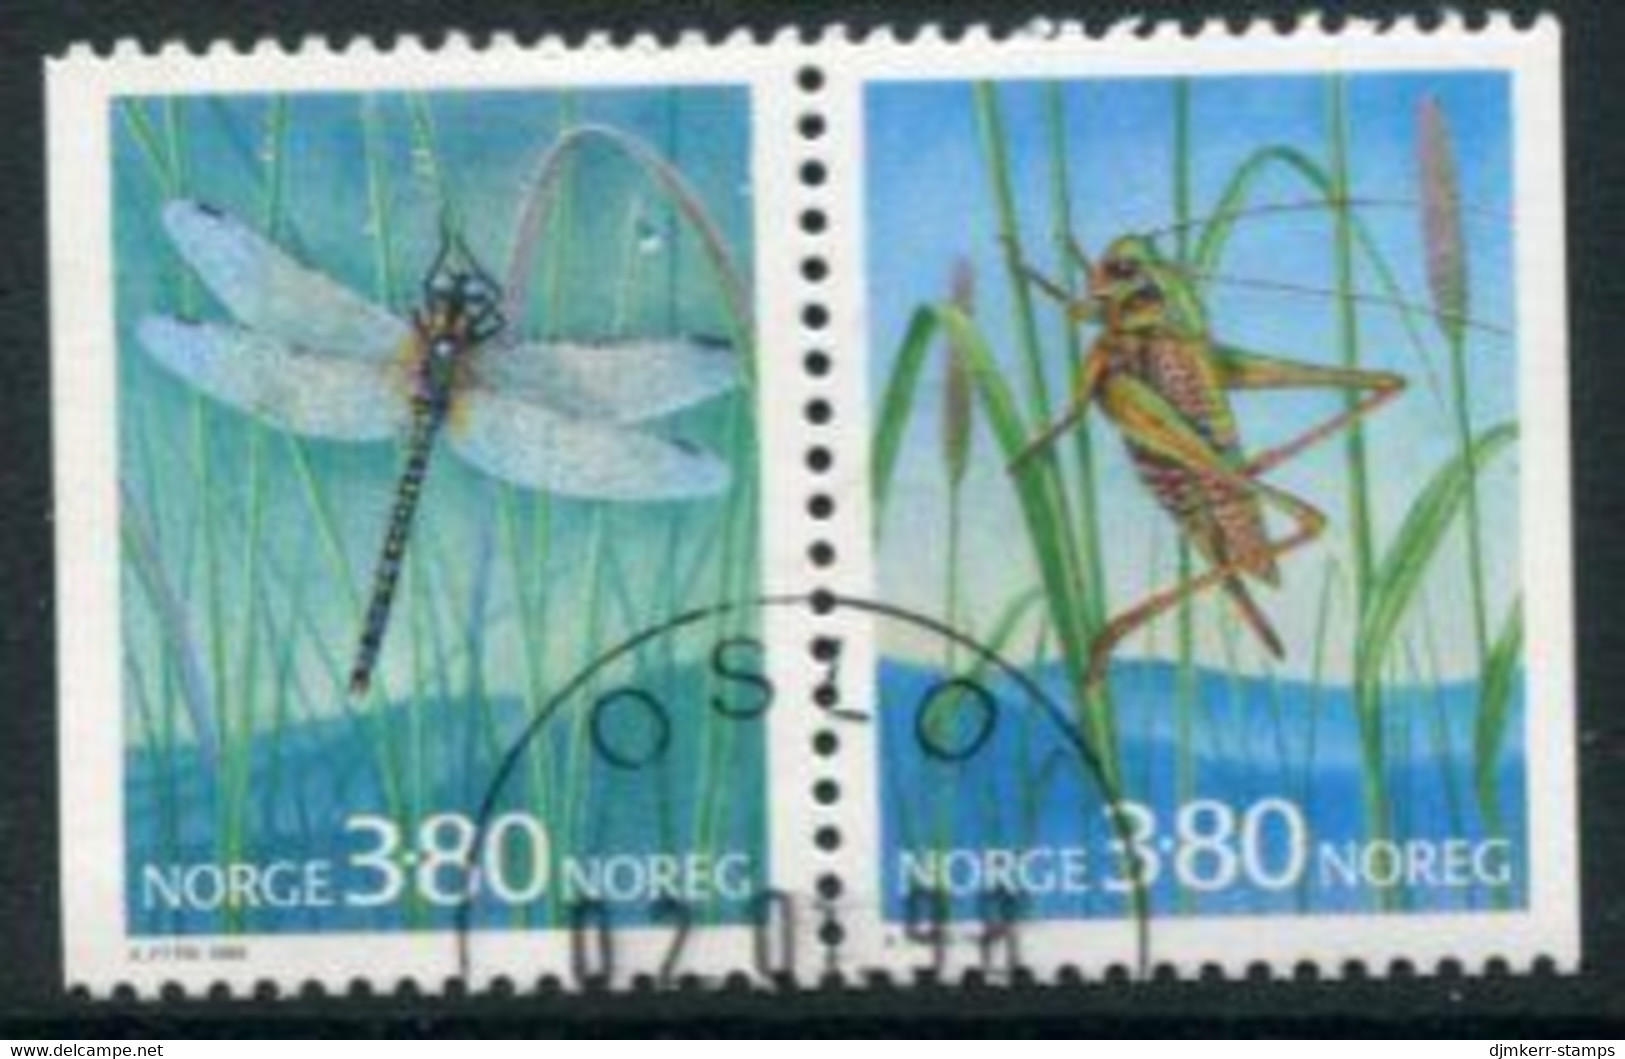 NORWAY 1998 Insects Pair Used.   Michel 1275-76 - Usati